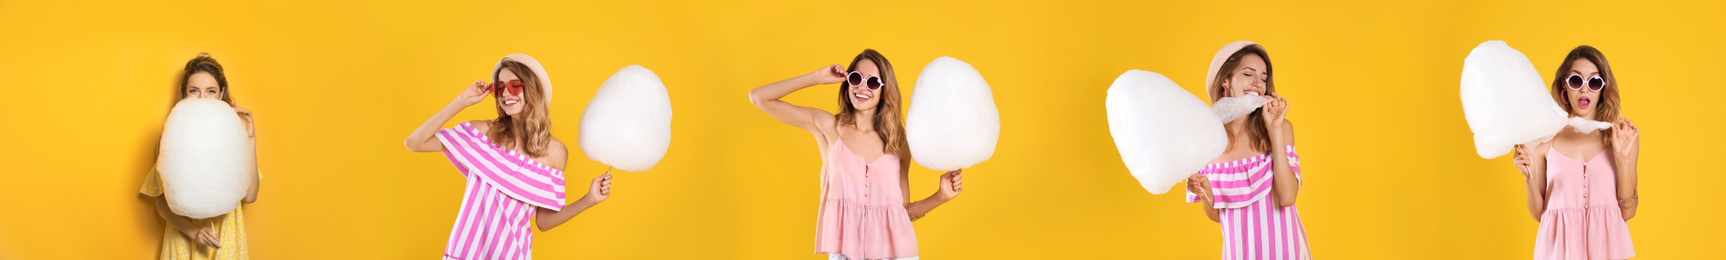 Collage with photos of young woman holding cotton candy on yellow background. Banner design